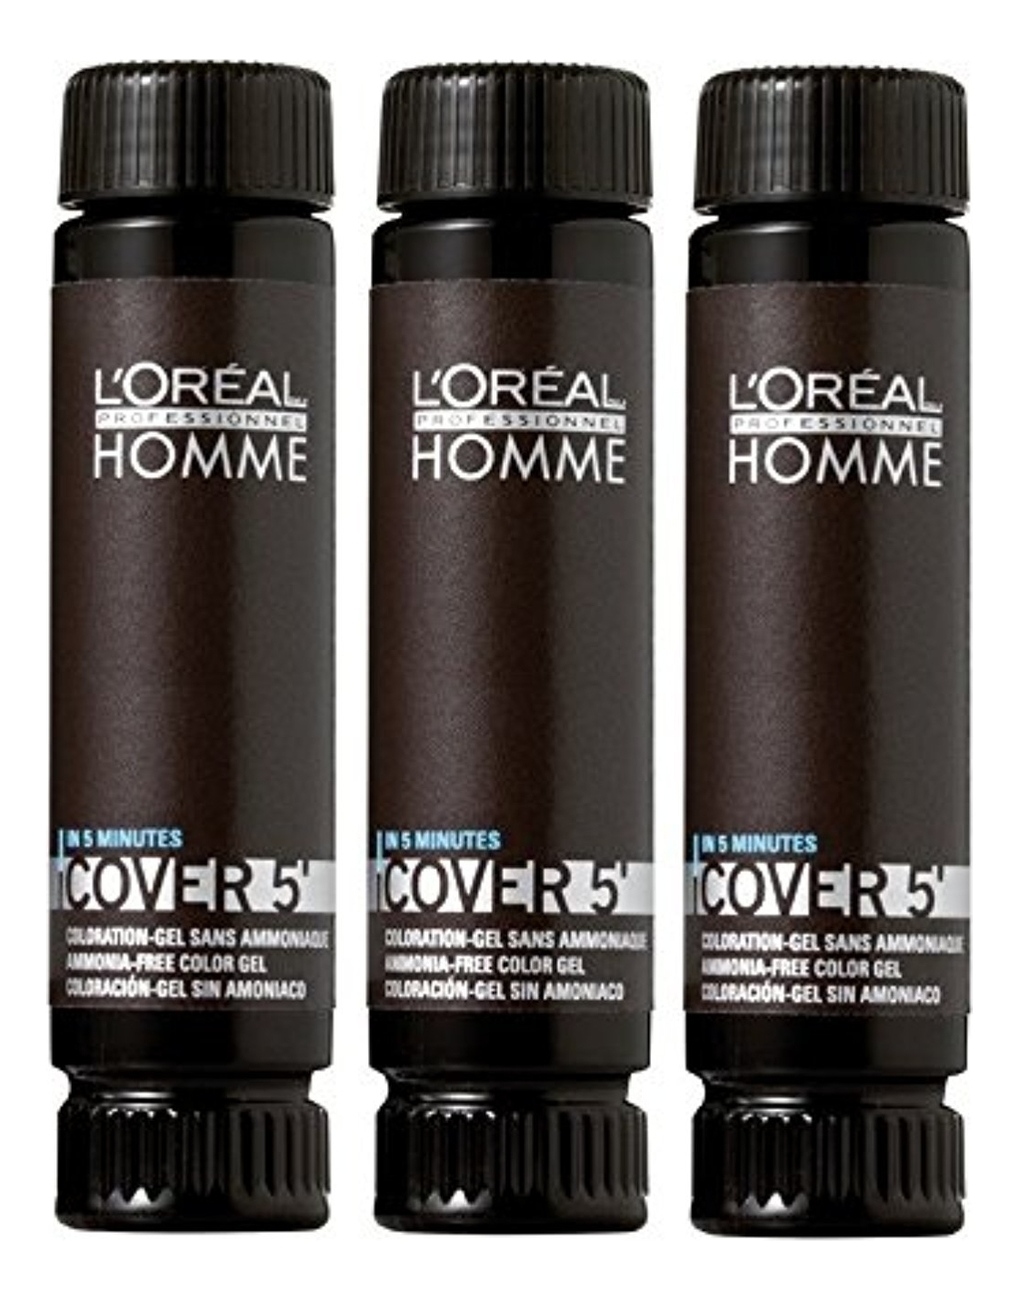 L oreal homme. L'Oreal Professionnel homme Cover 5 №5. Loreal Professionnel homme Cover 5 № 3 50мл. Тонирующий гель homme Cover 5 №6. Лореаль homme Cover 5' тонирующий гель 3.